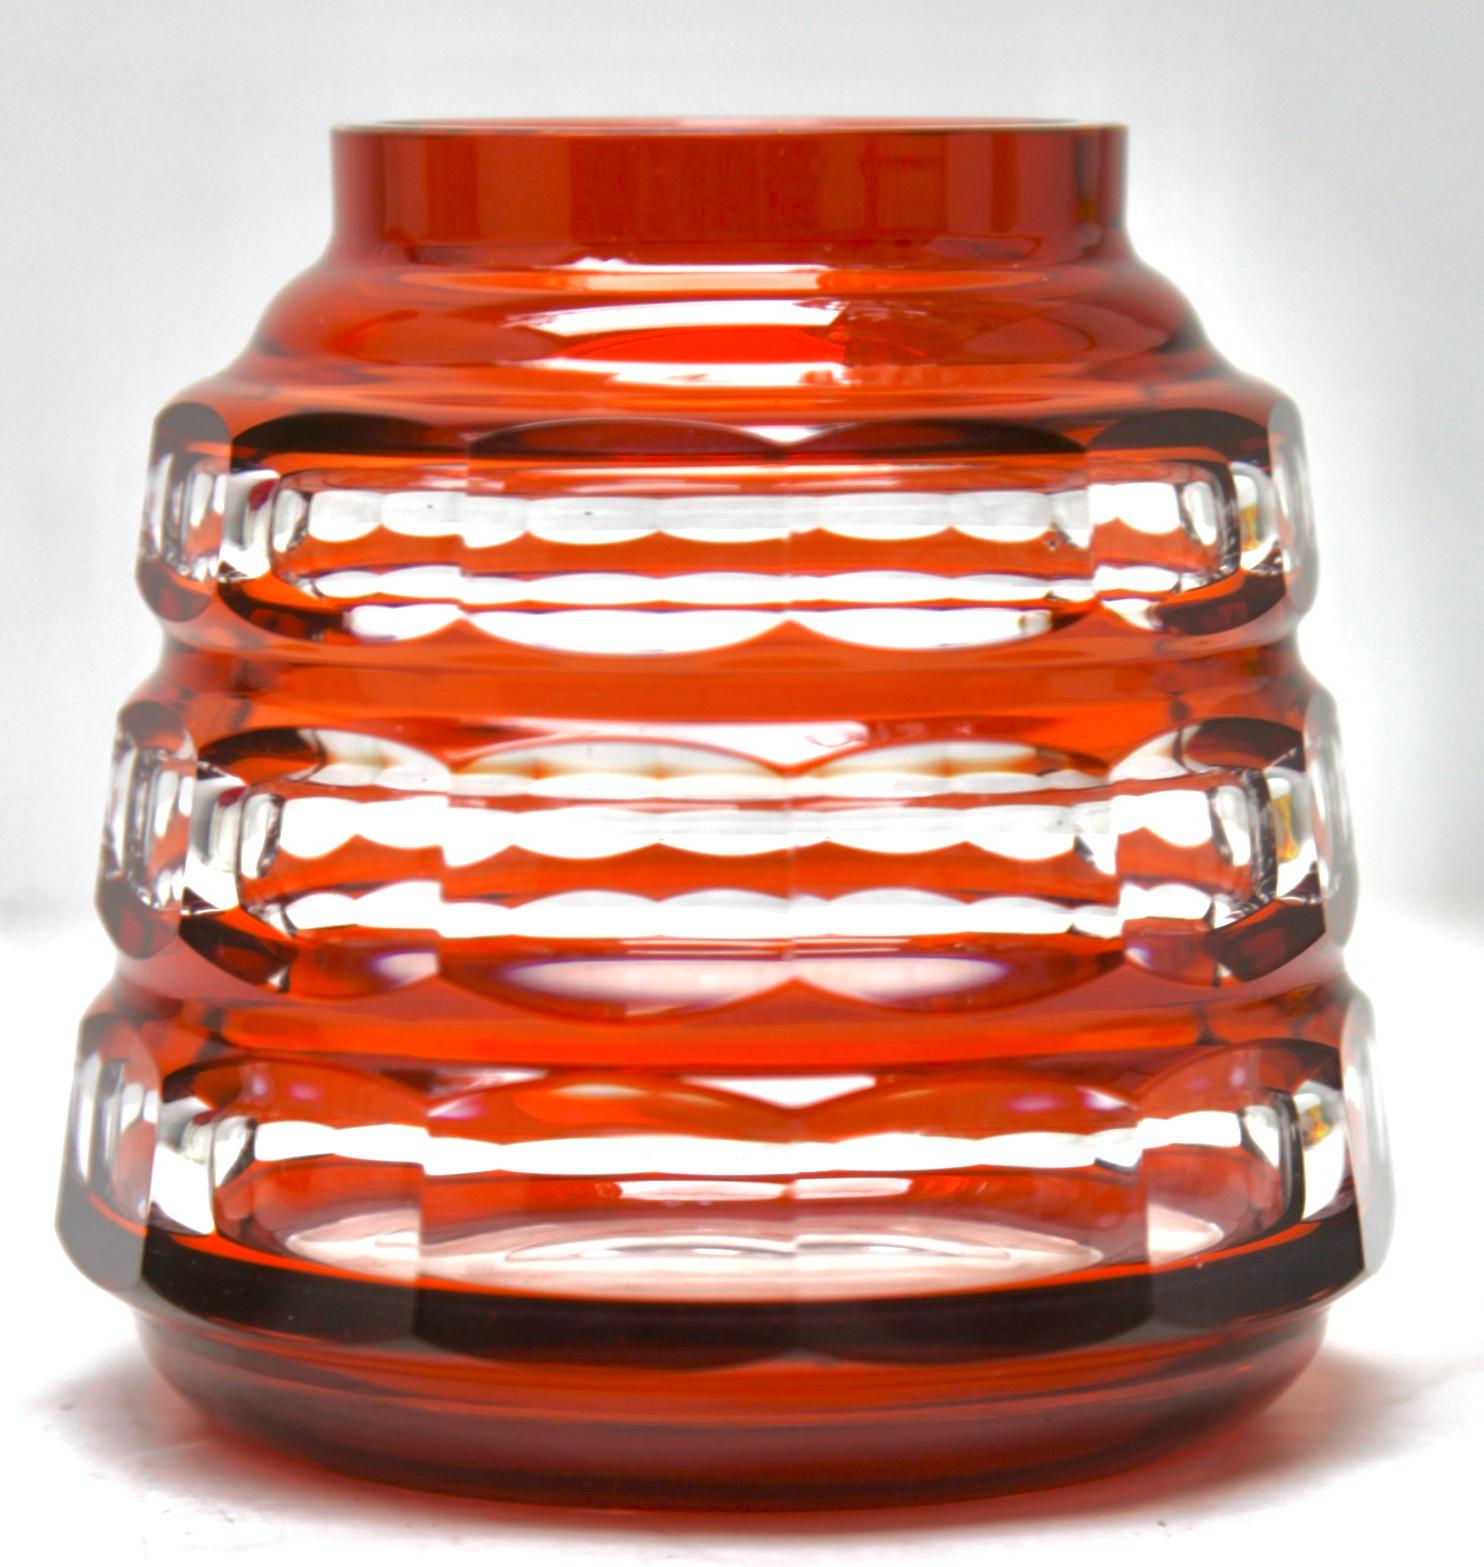 Val Saint Lambert crystal vase cut-to-clear, 1950s
by Val Saint-Lambert.

Color: vsl Clair double Aurore?
And popularly called orange

Beautiful Val Saint-Lambert hexagonal crystal vases, handcut-to-clear, the glass is thick, deeply and evenly